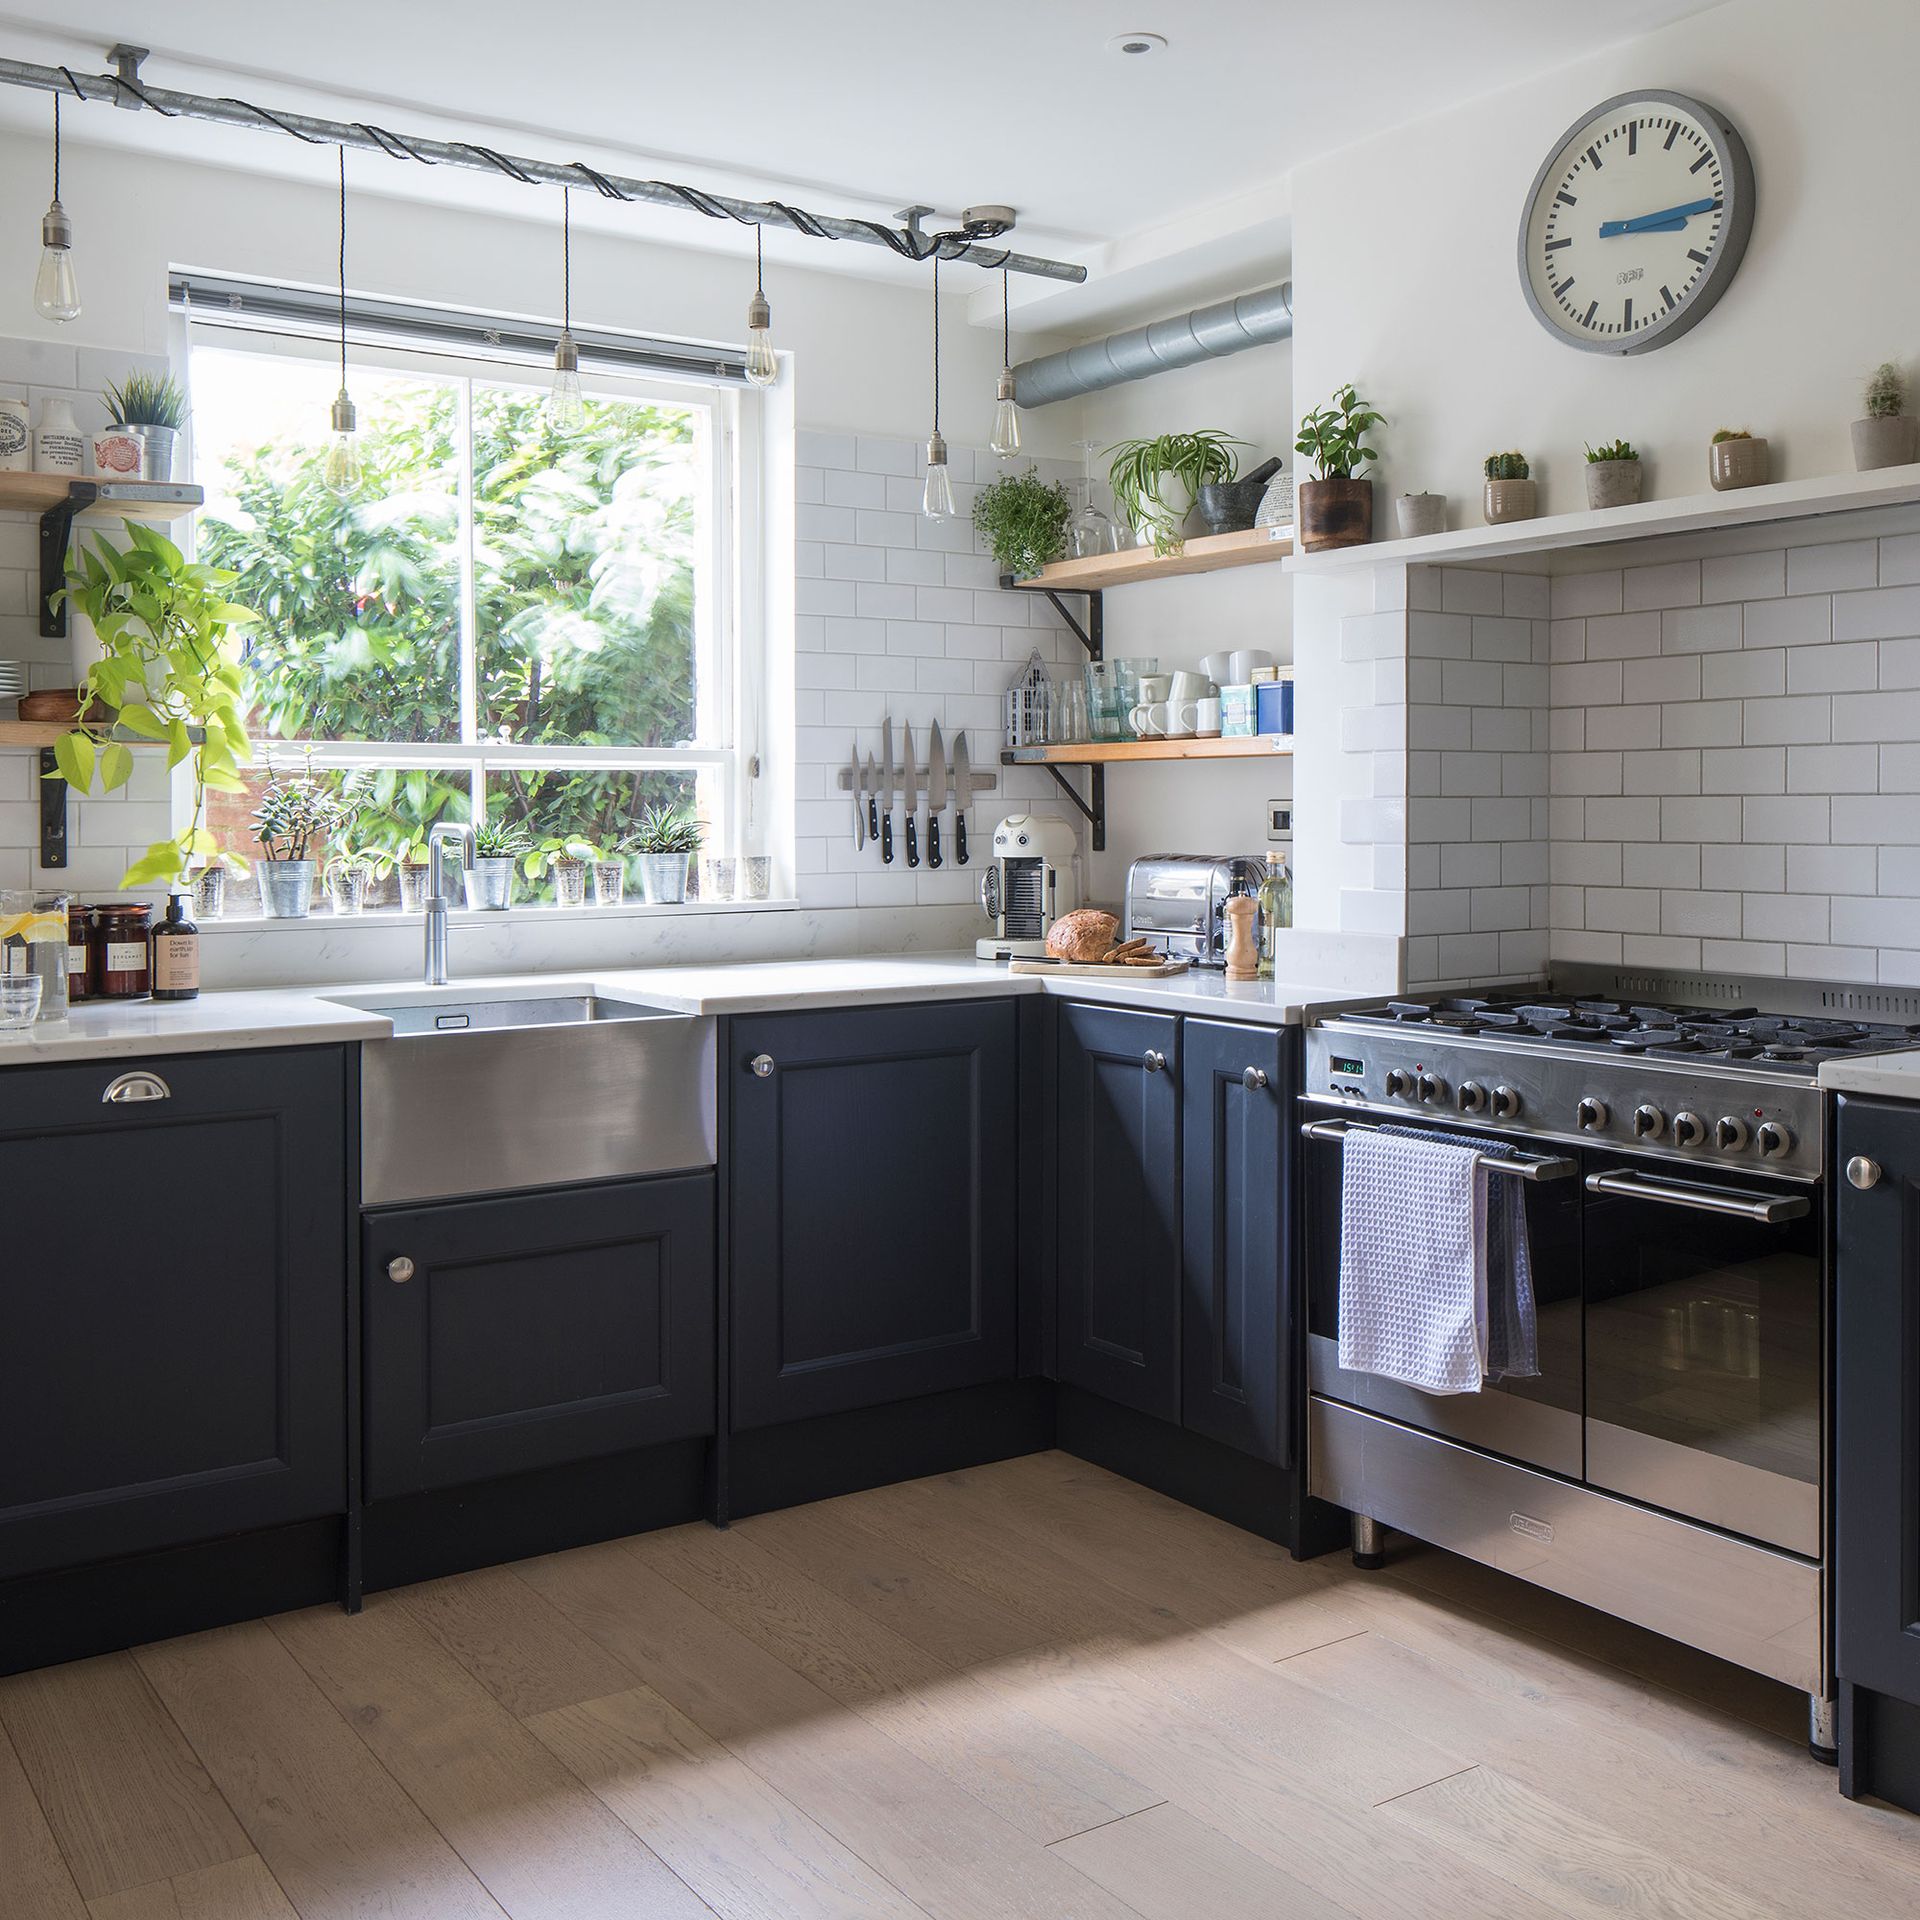 Mid-century and Scandi styles have inspired this Edwardian semi | Ideal ...